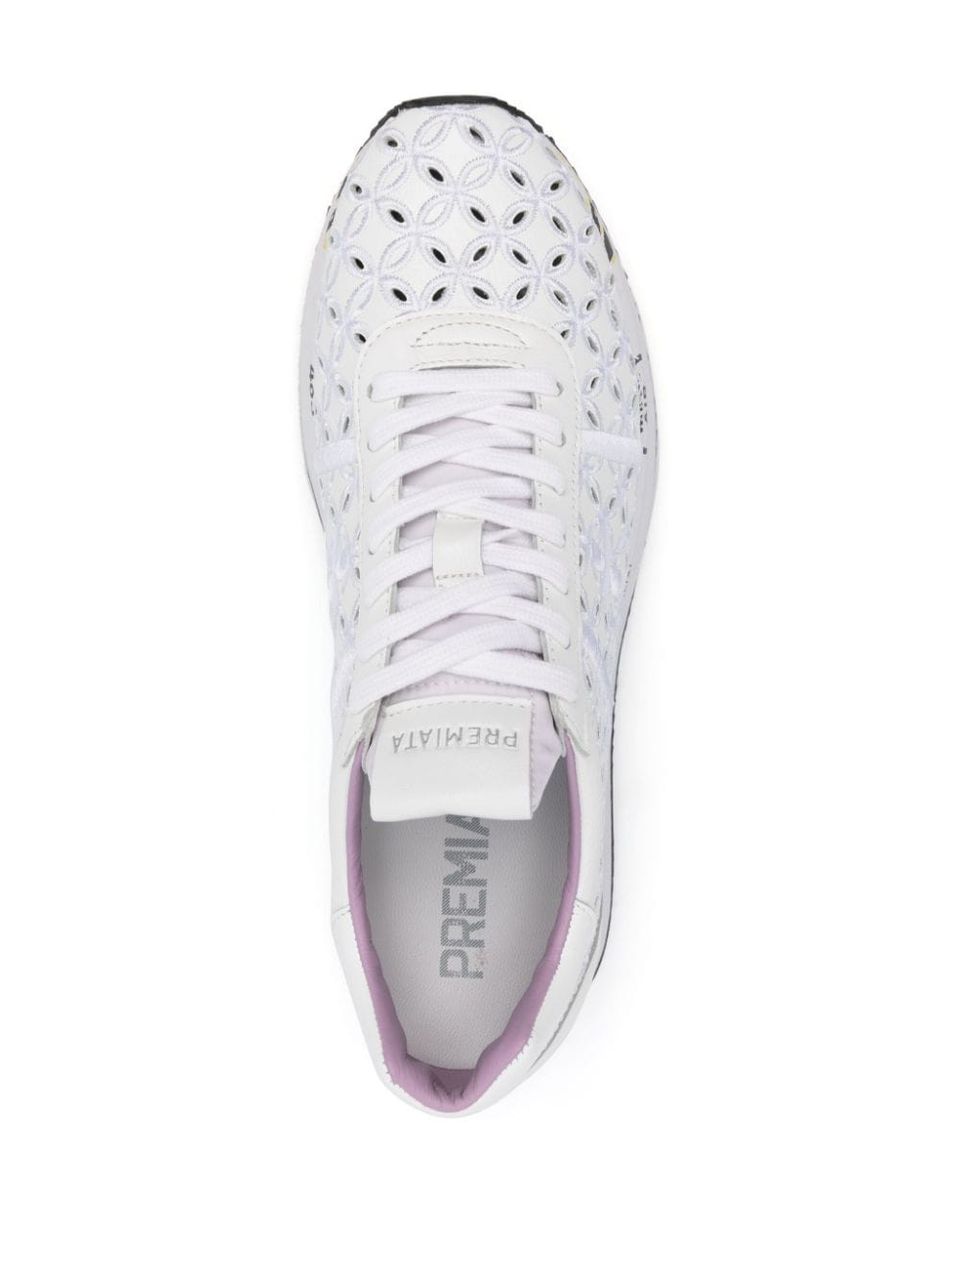 'Conny 6749' sneakers